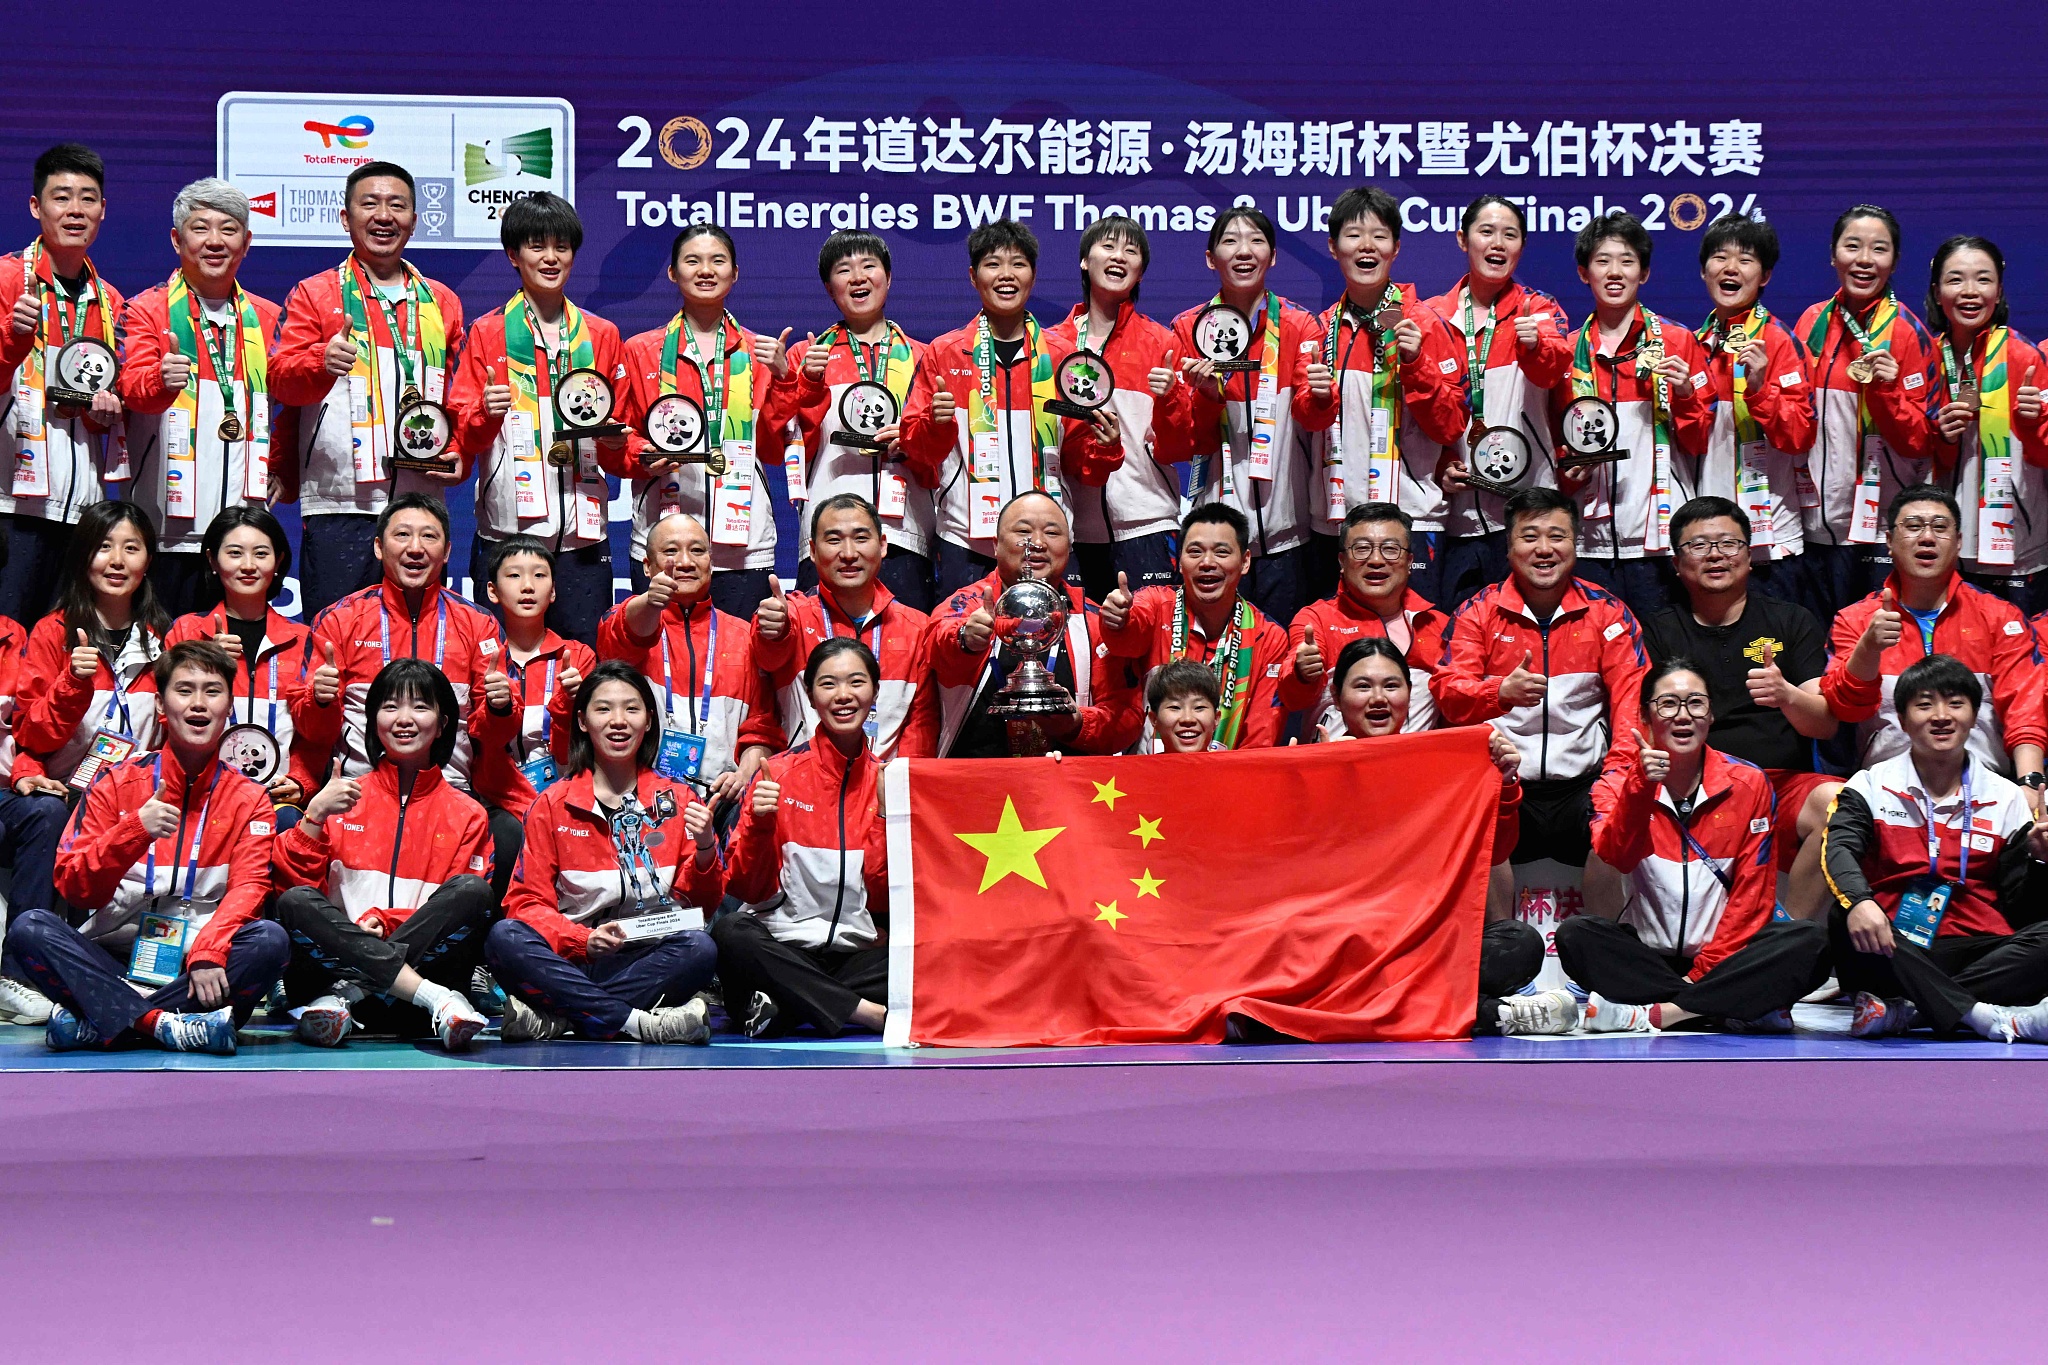 Members of Chinese women's badminton national team celebrate with the national flag and the trophy after winning the Uber Cup title in Chengdu, China, May 5, 2024. /CFP